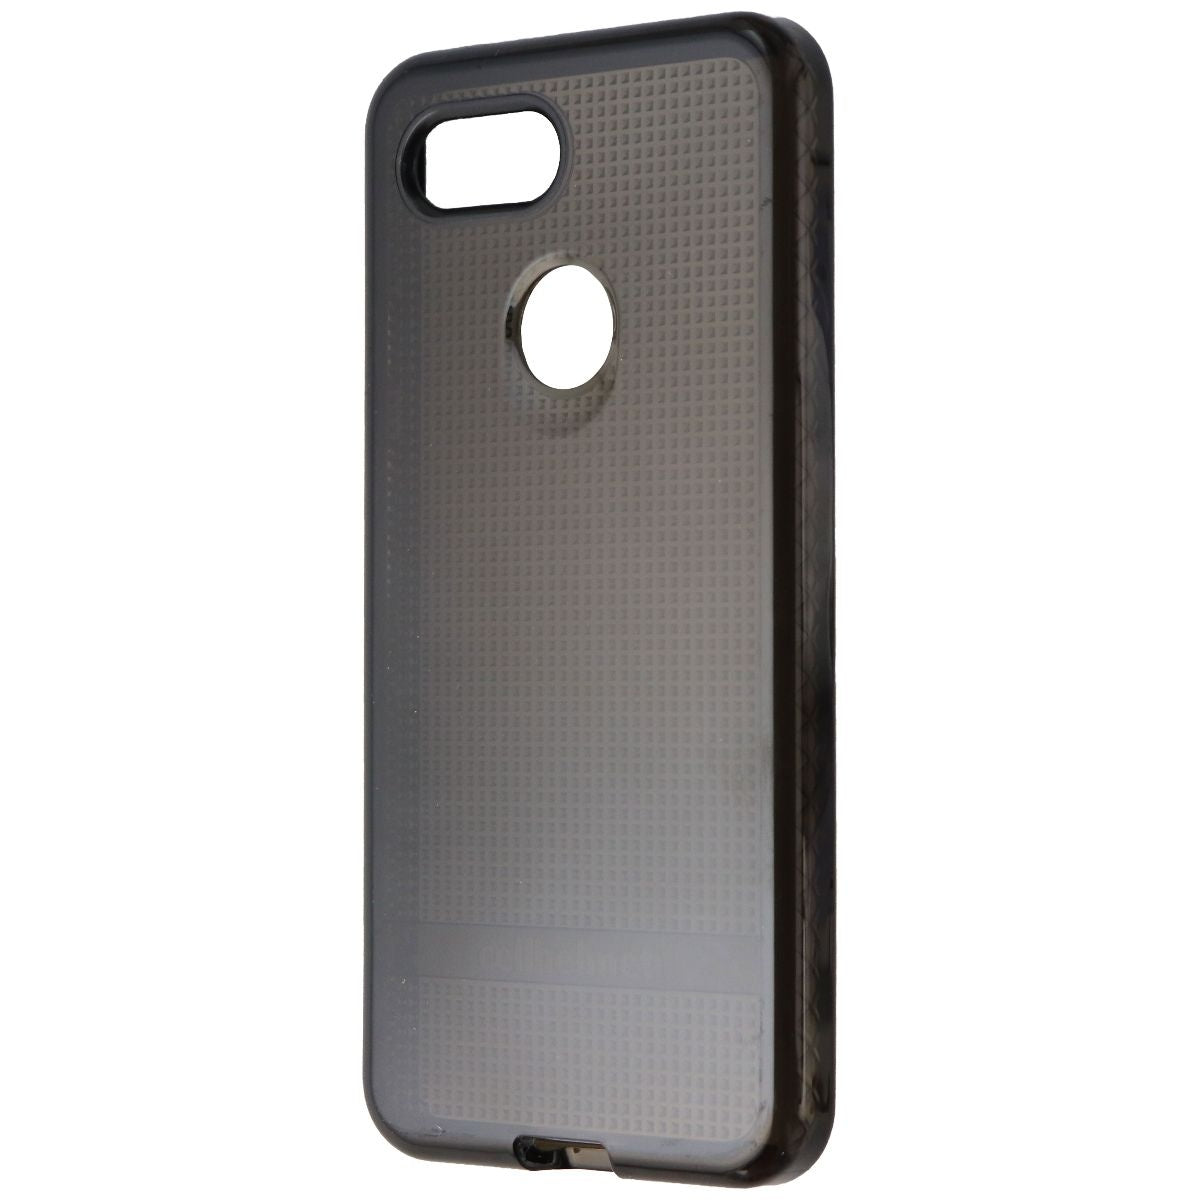 DO NOT USE - Check U13018 Family Cell Phone - Cases, Covers & Skins CellHelmet    - Simple Cell Bulk Wholesale Pricing - USA Seller